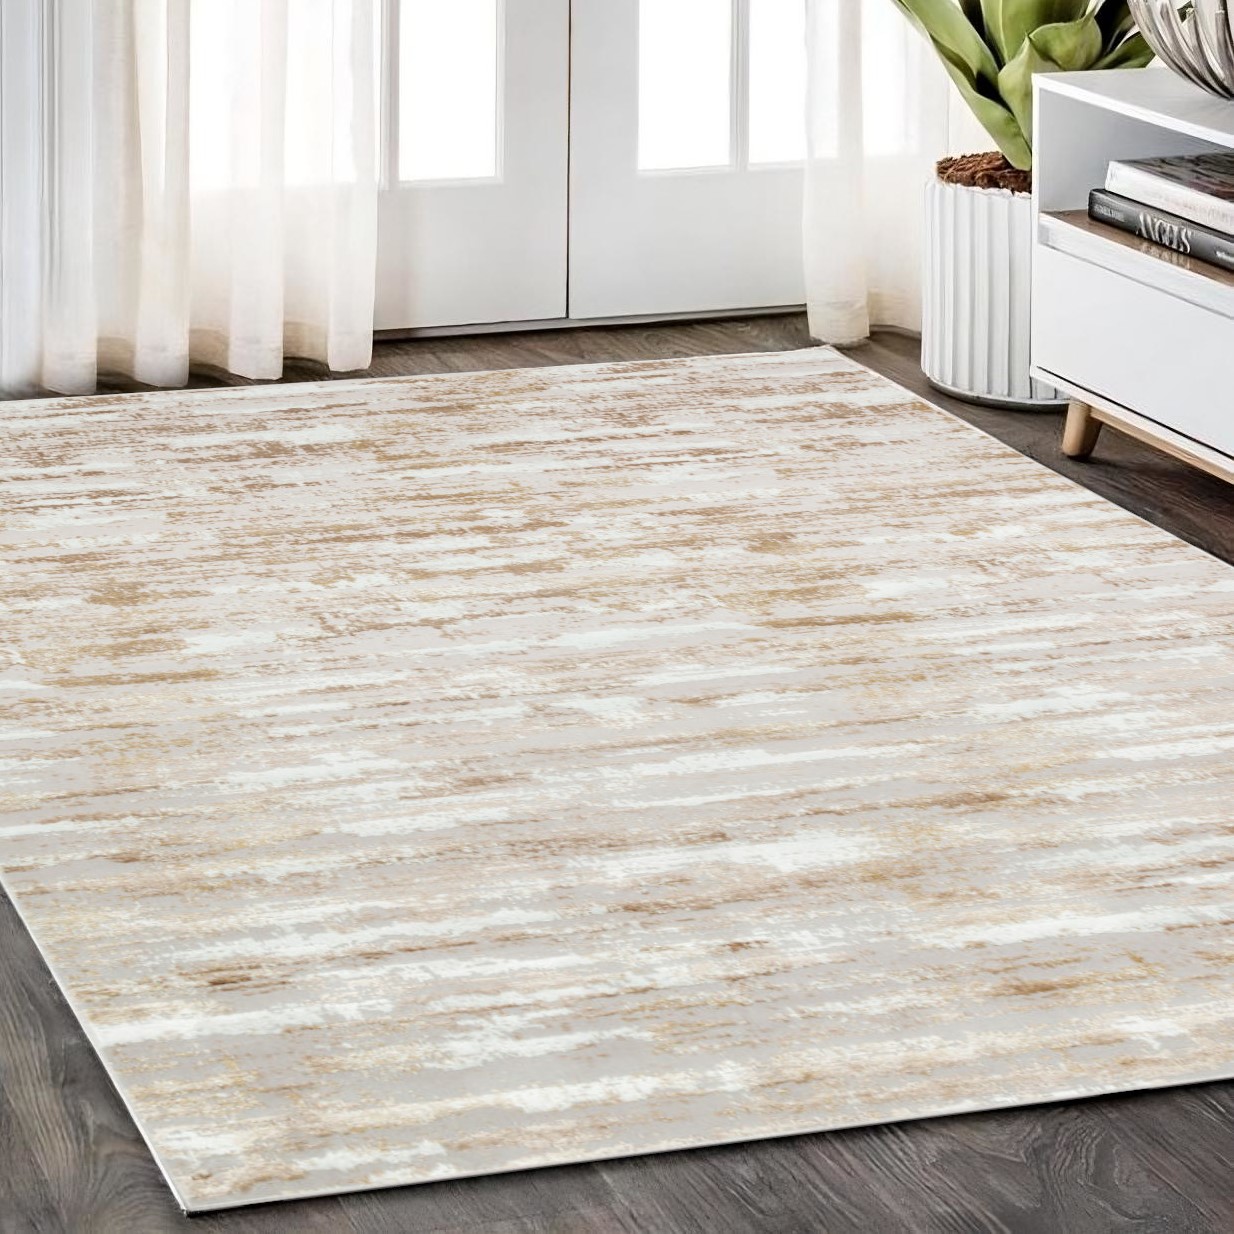 4' x 6' Beige Abstract Washable Non Skid Area Rug-553771-1